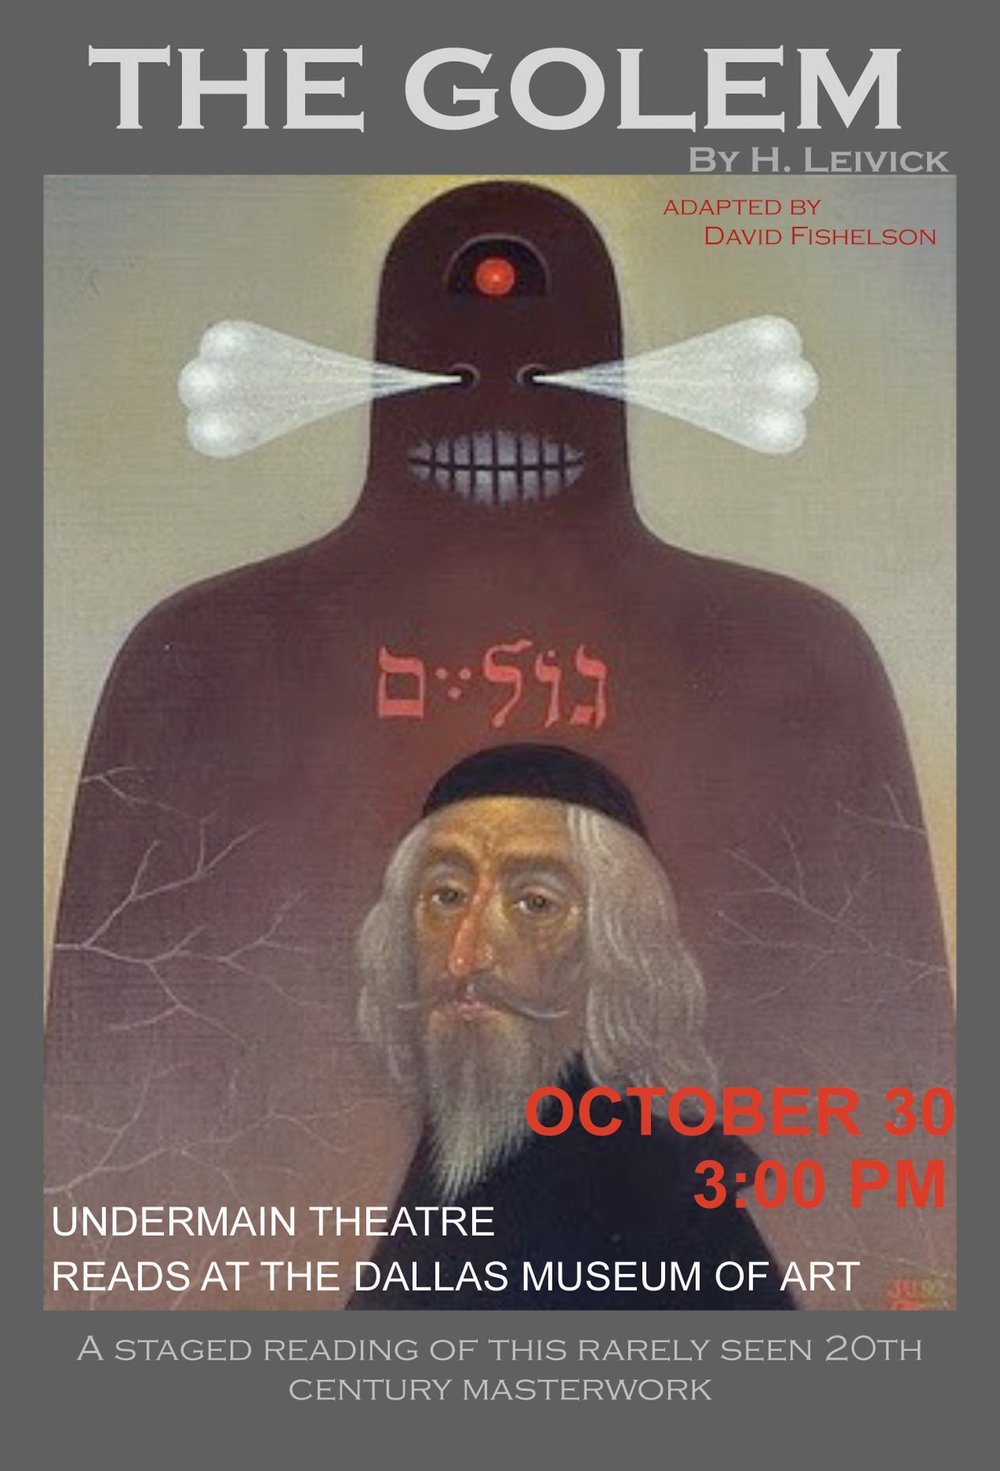 UNDERMAIN THEATRE ARCHIVE: The Golem by H. Leivick, 2010